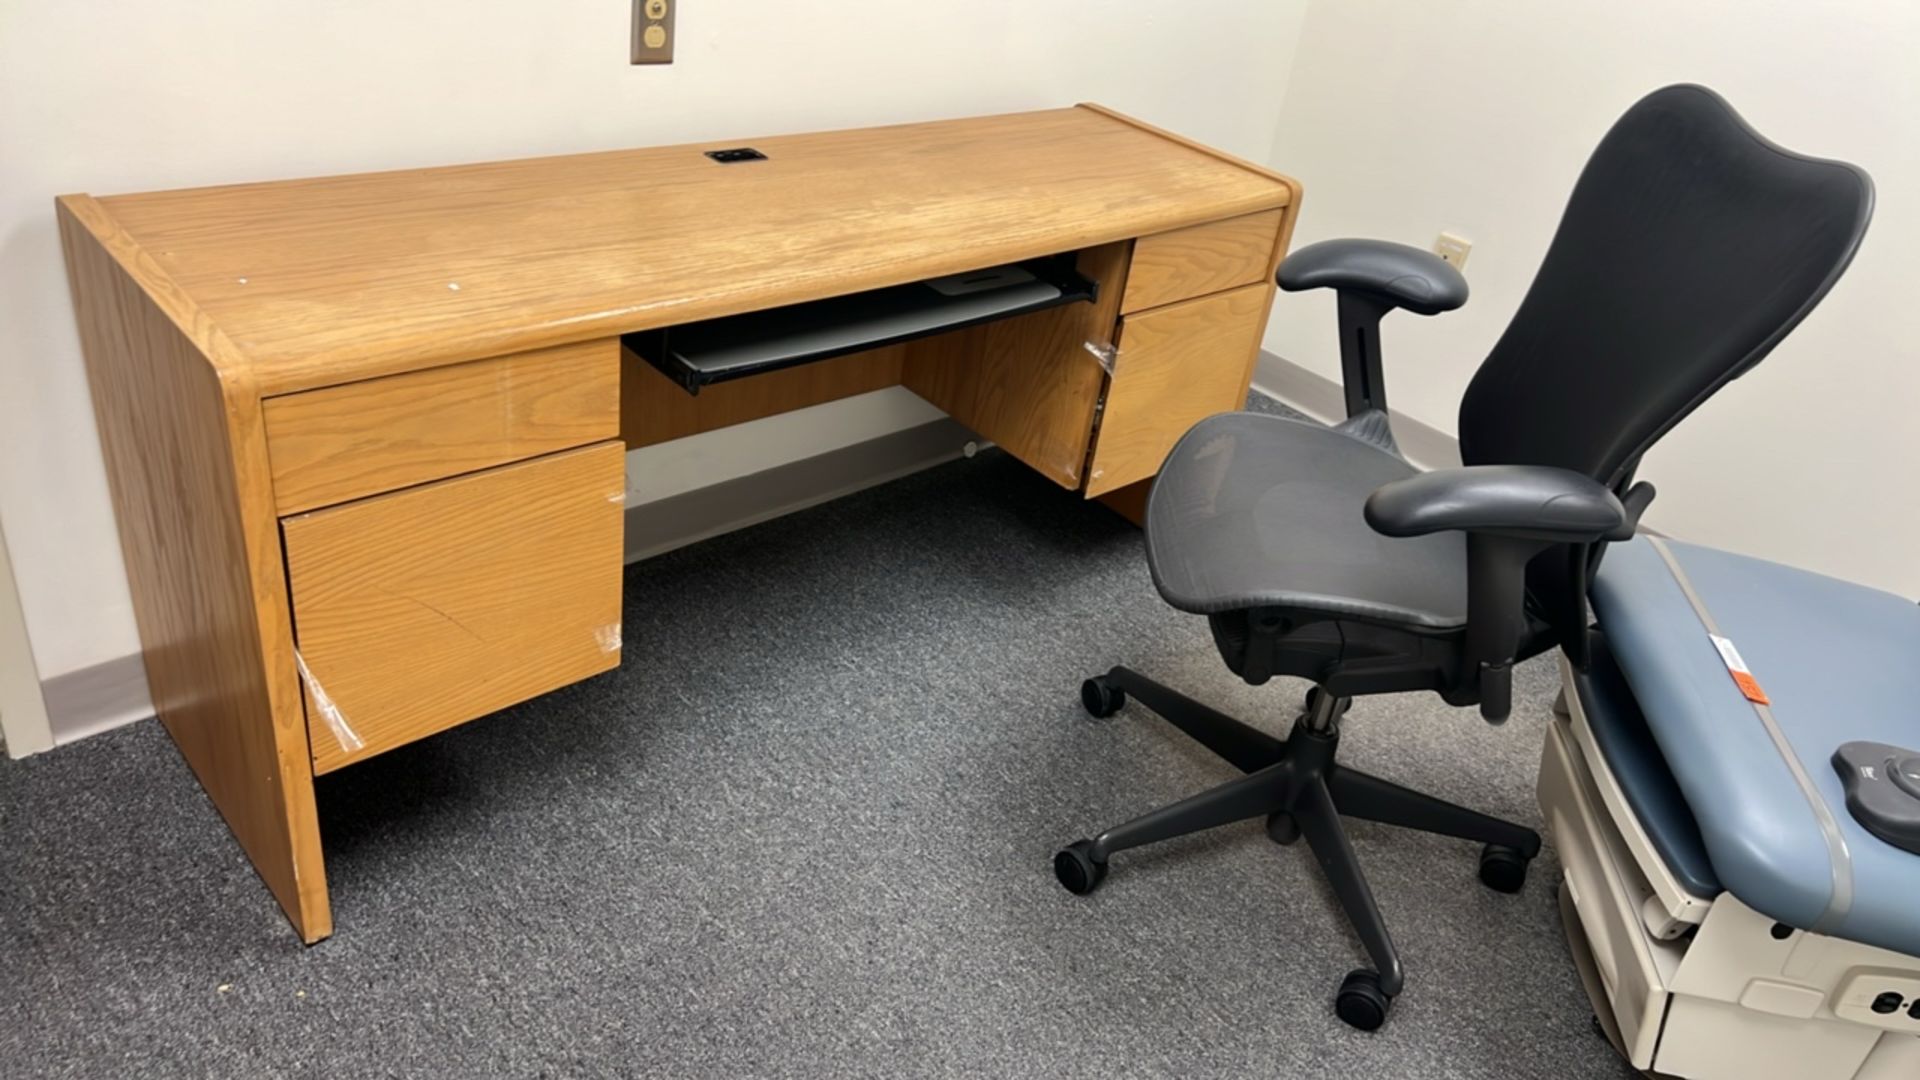 OFFICE TO INCLUDE: DESKS, CHAIRS, PHONE, FILE CABINET, WHITE BOARD - Image 5 of 6